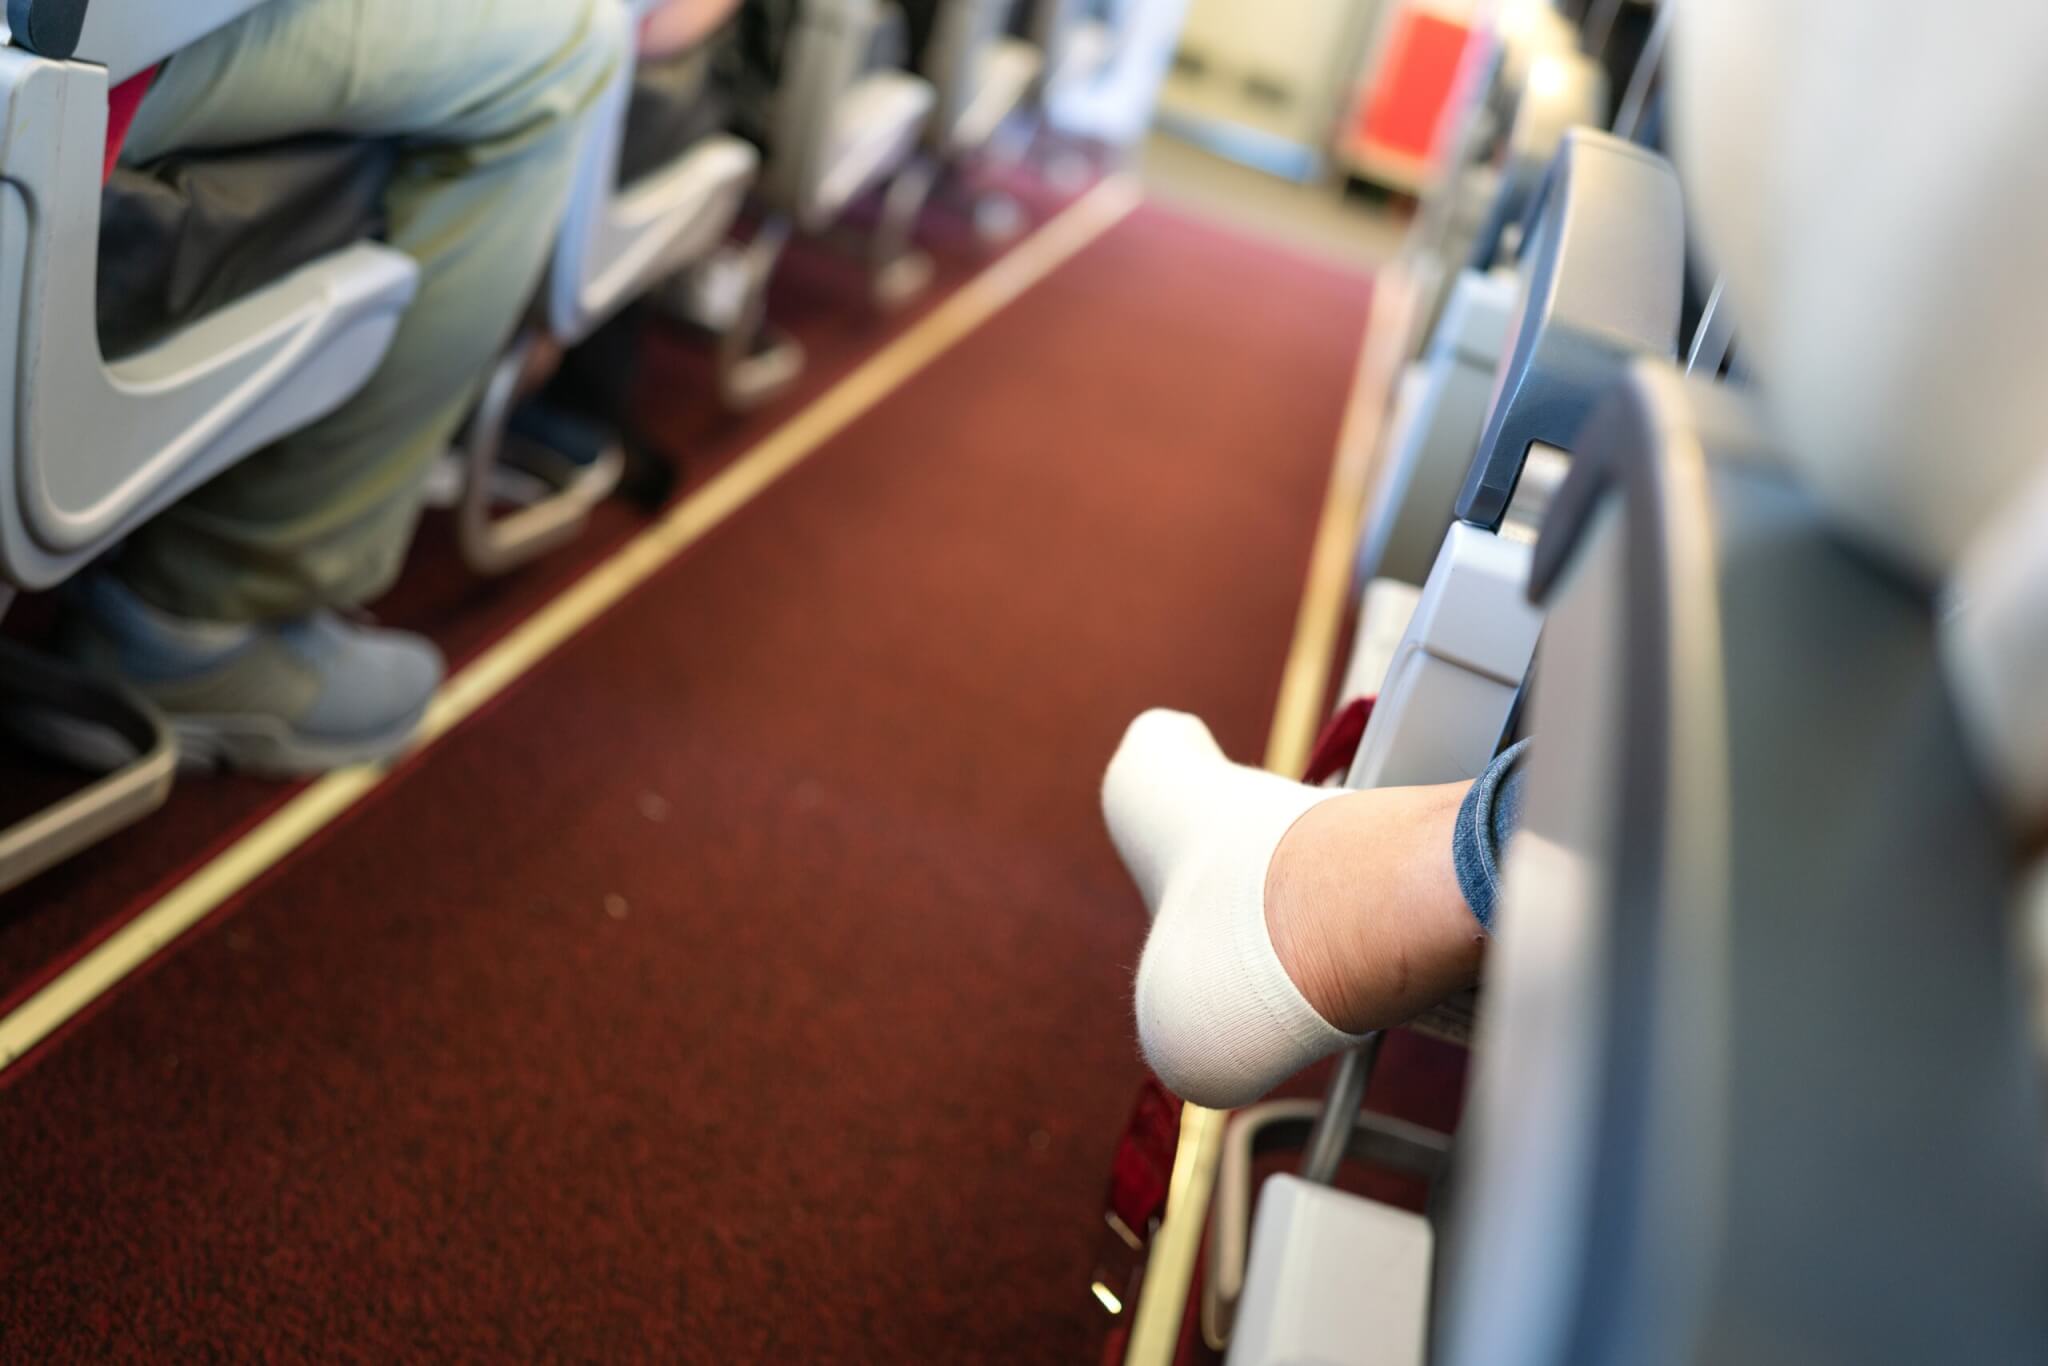 Airplane passenger with shoes off and socks in the aisle during the flight.